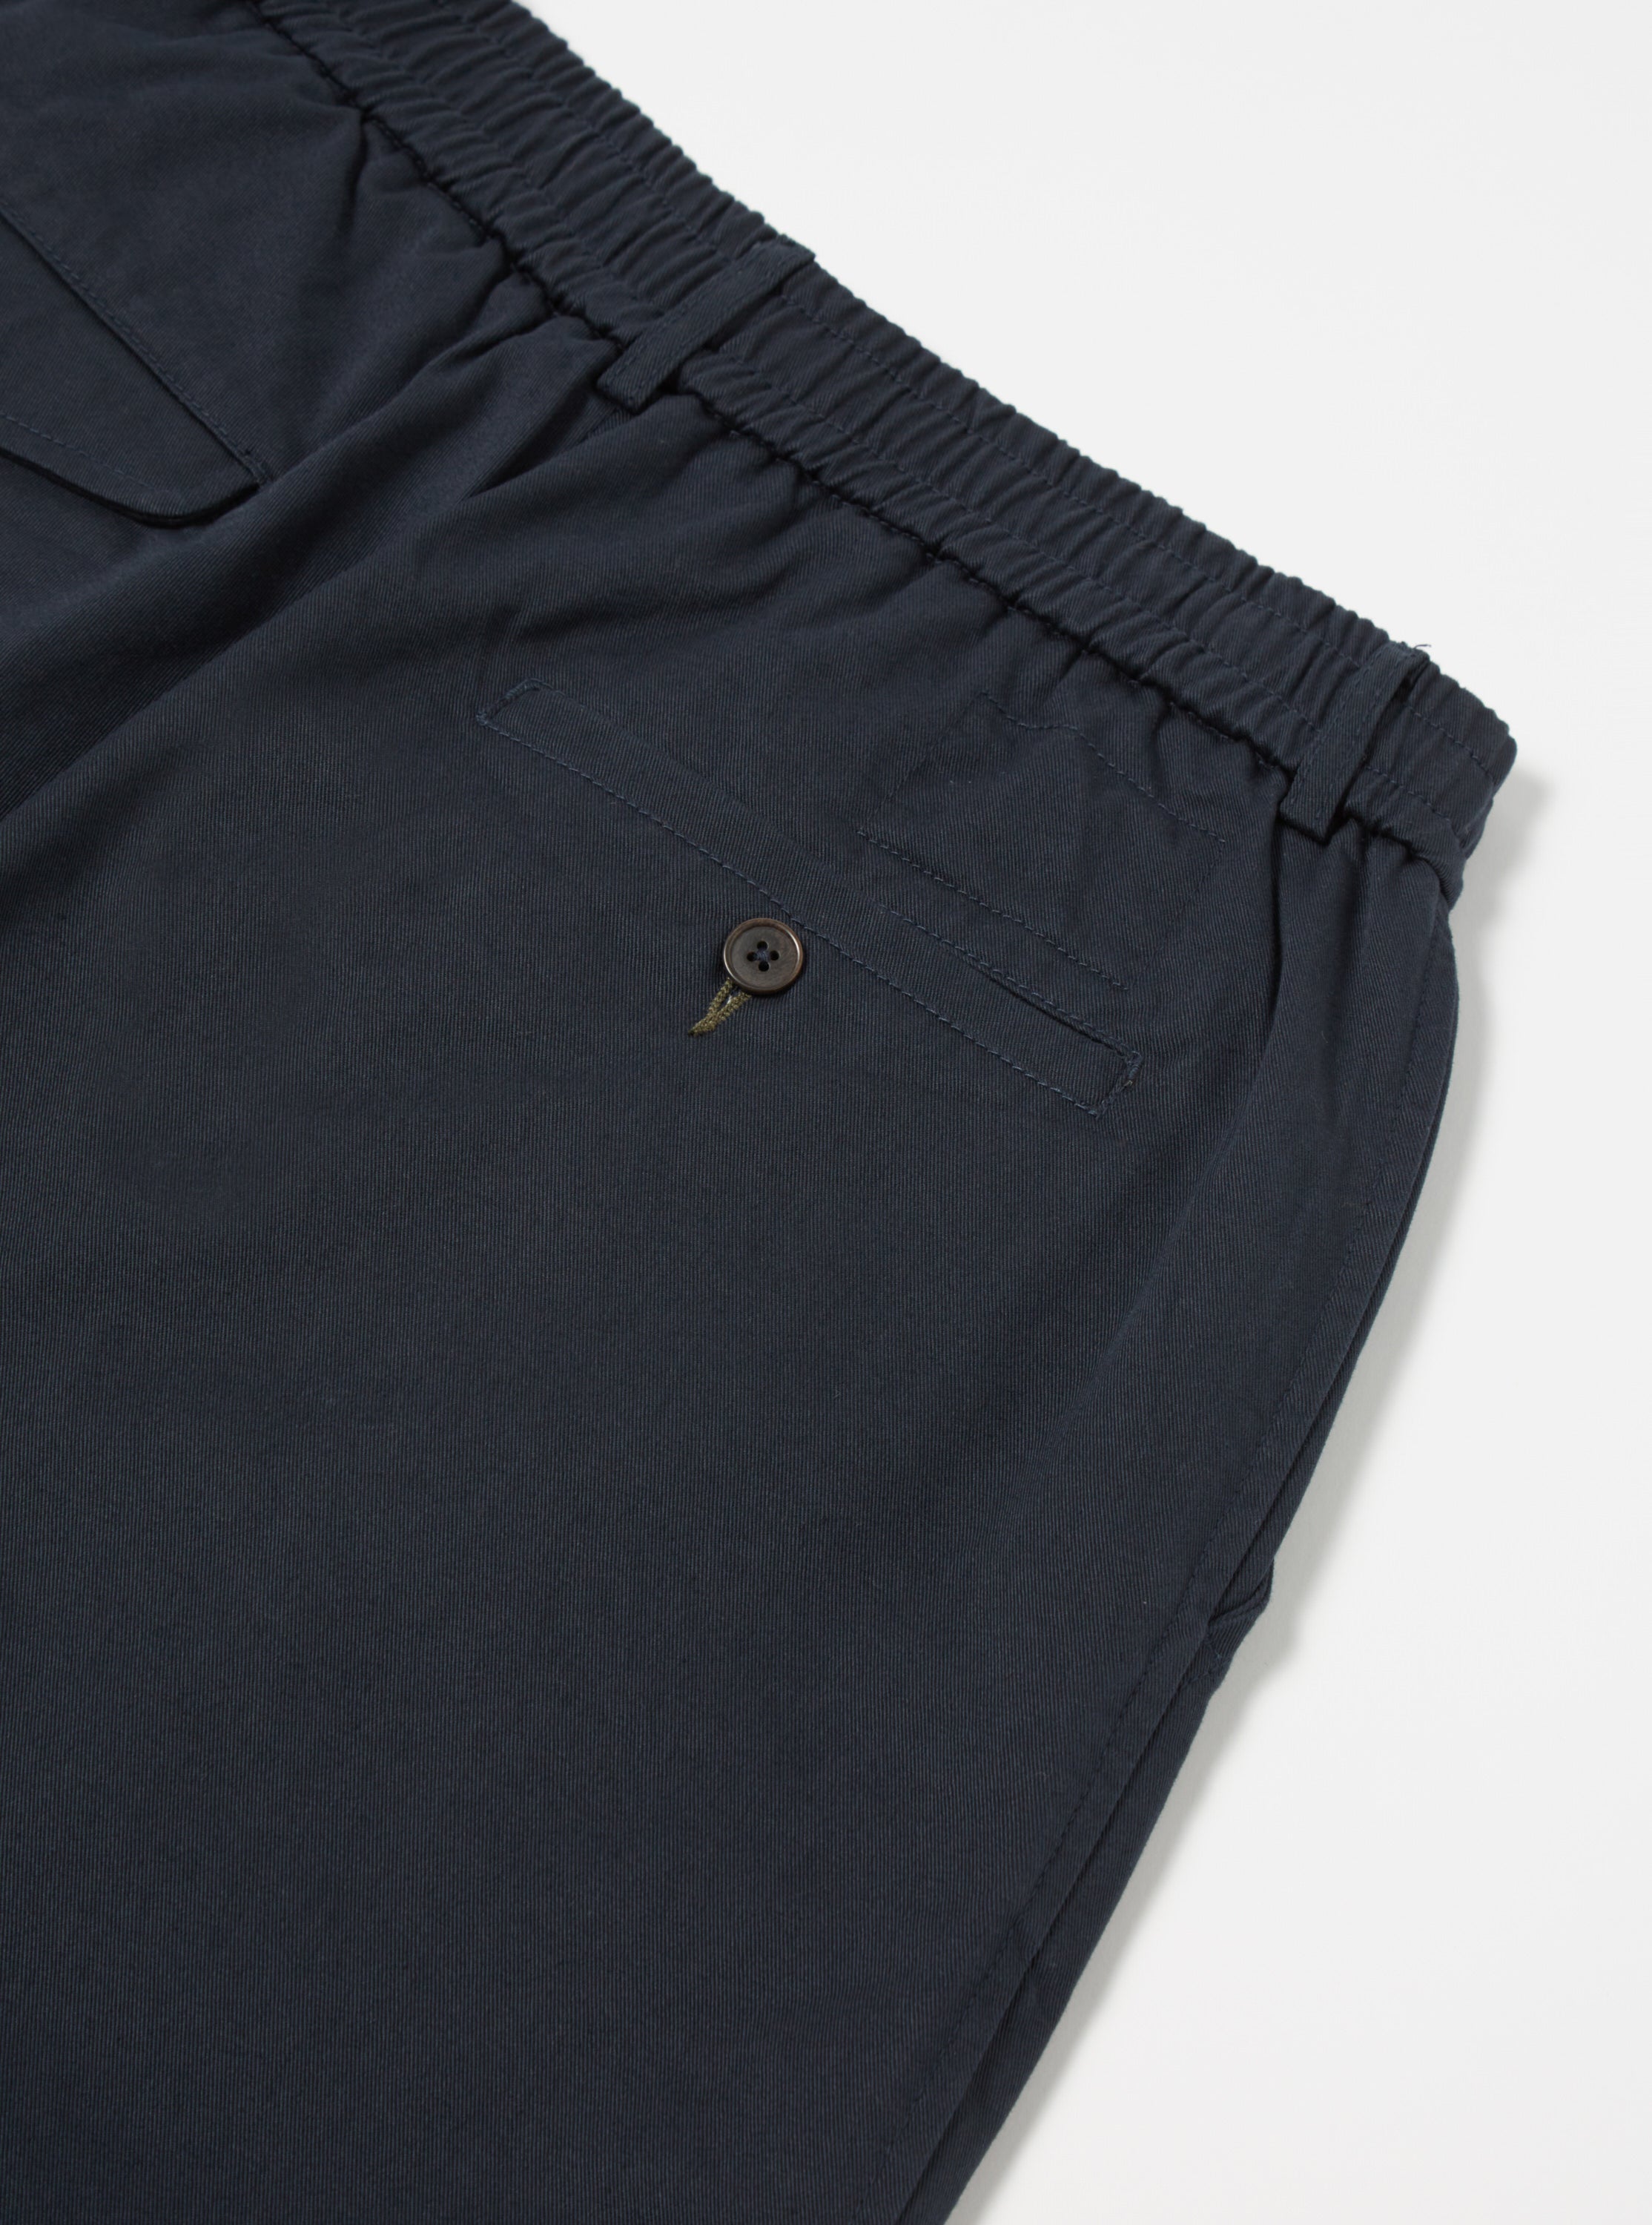 Universal Works Pleated Track Short in Navy Twill